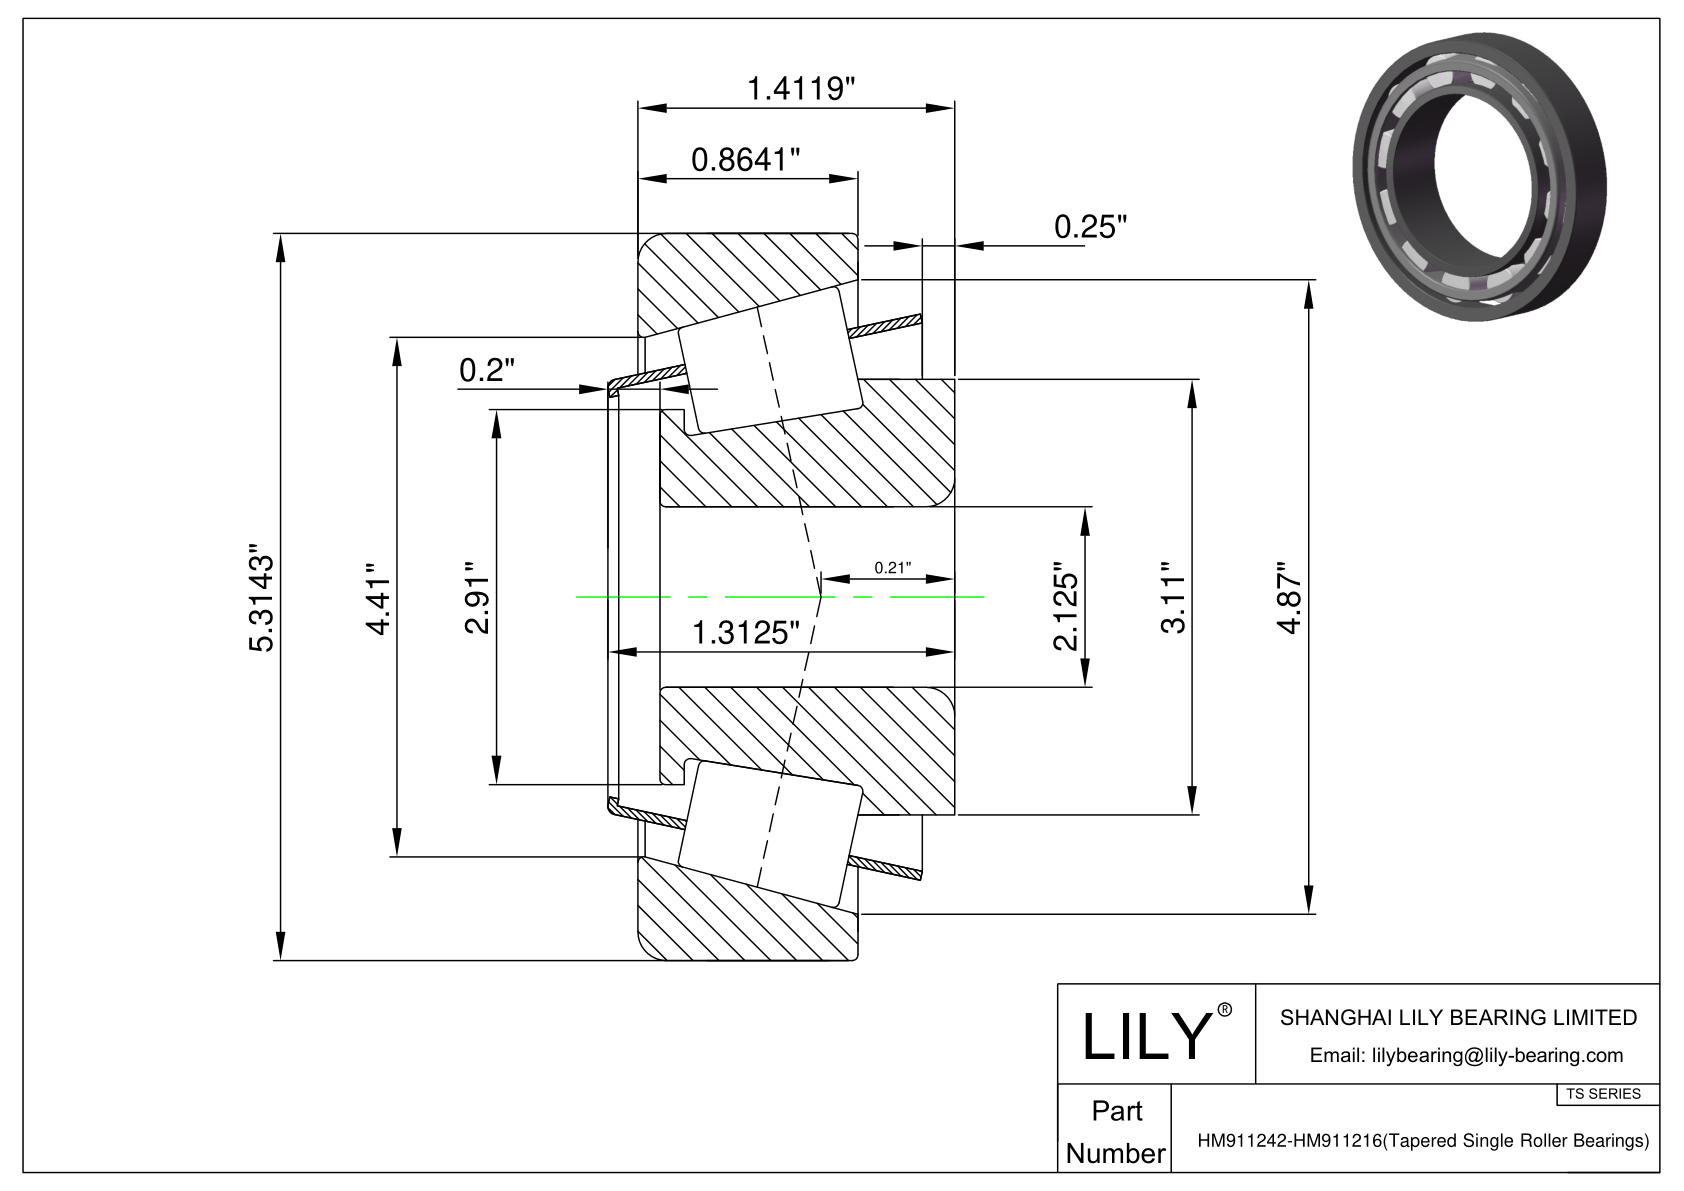 HM911242-HM911216 TS (Tapered Single Roller Bearings) (Imperial) cad drawing